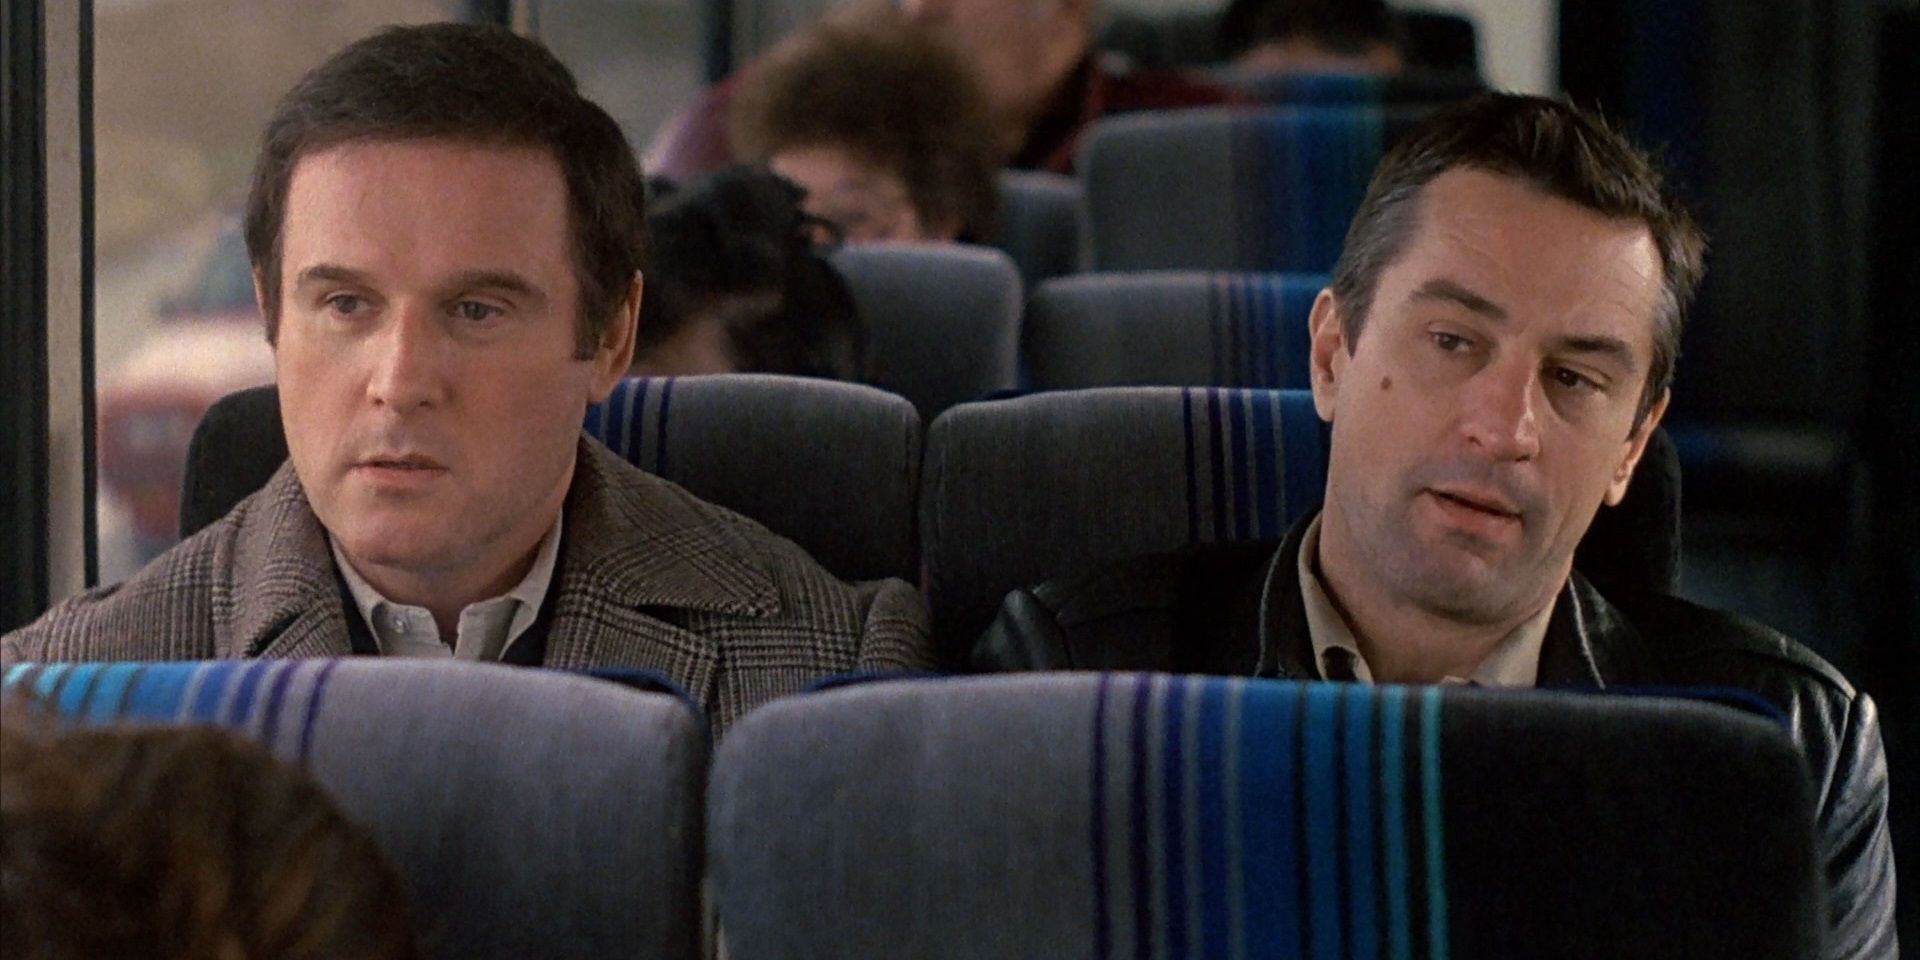 Robert De Niro and Charles Grodin on a bus in Midnight Run